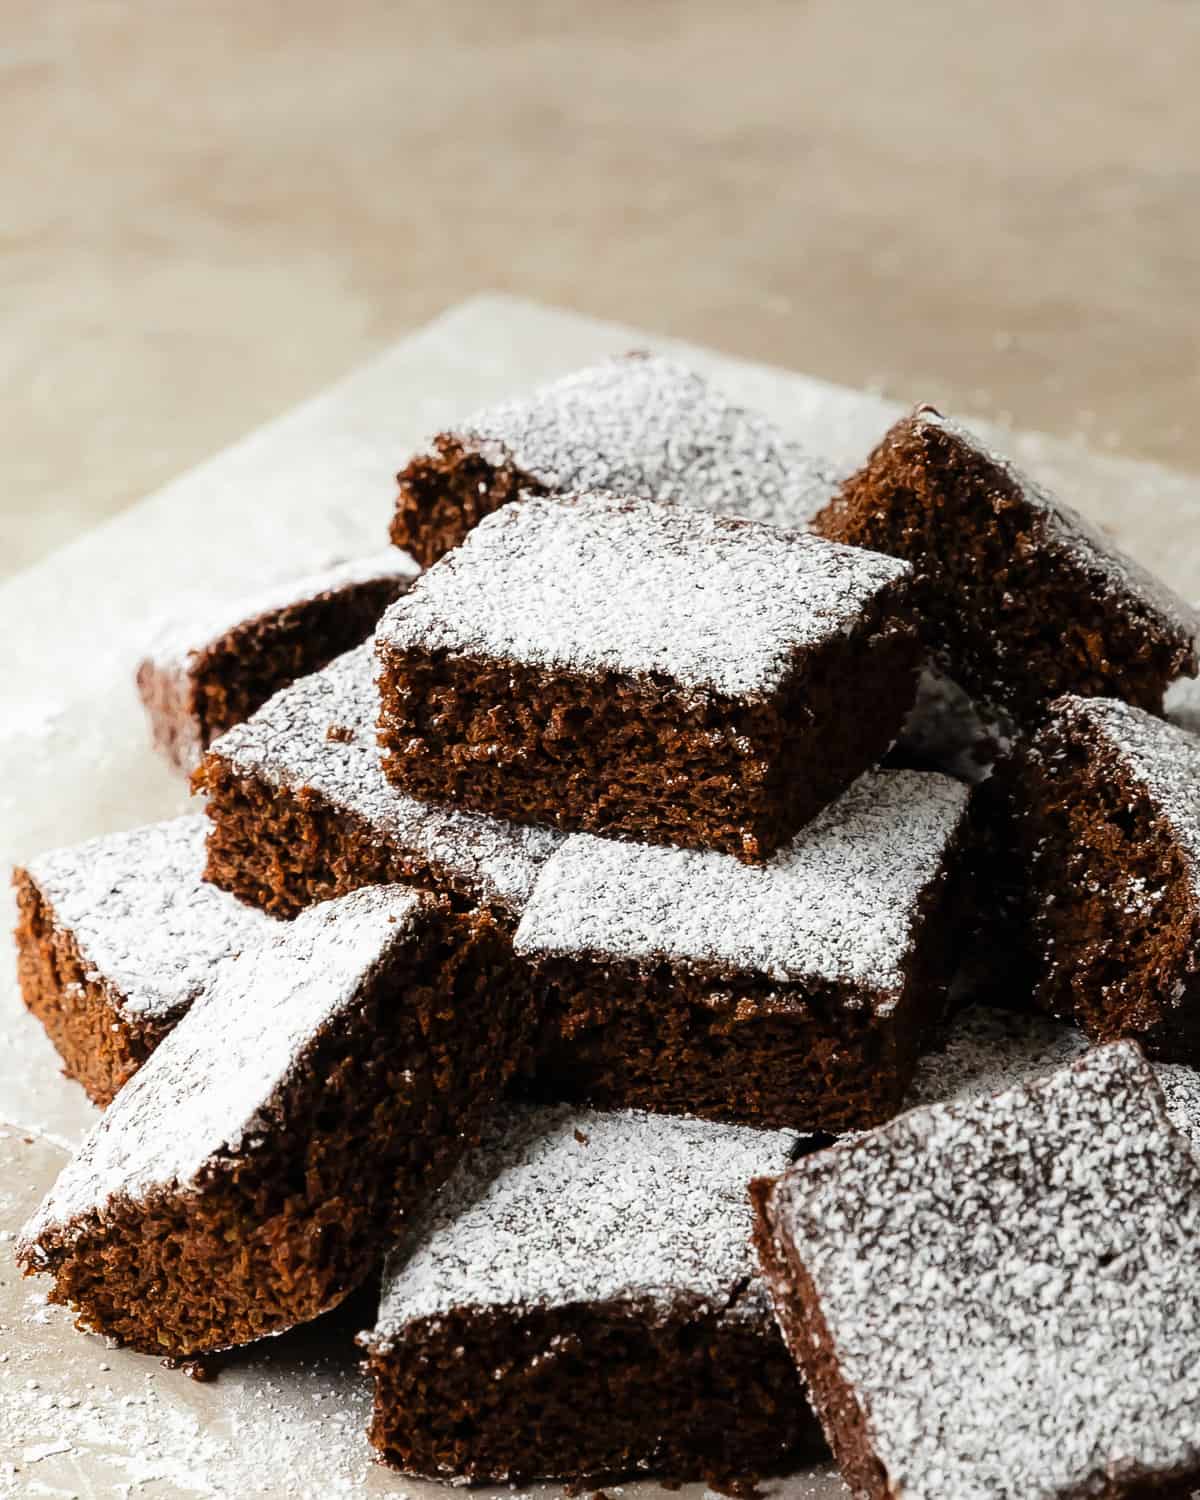 Molasses cake is a deliciously rich, tender and moist cake filled with molasses, a touch bright lemon zest and lots of cozy warming spices. Top this old fashioned molasses cake with a dusting of powdered sugar for the perfect simple, easy to make and festive cake.  